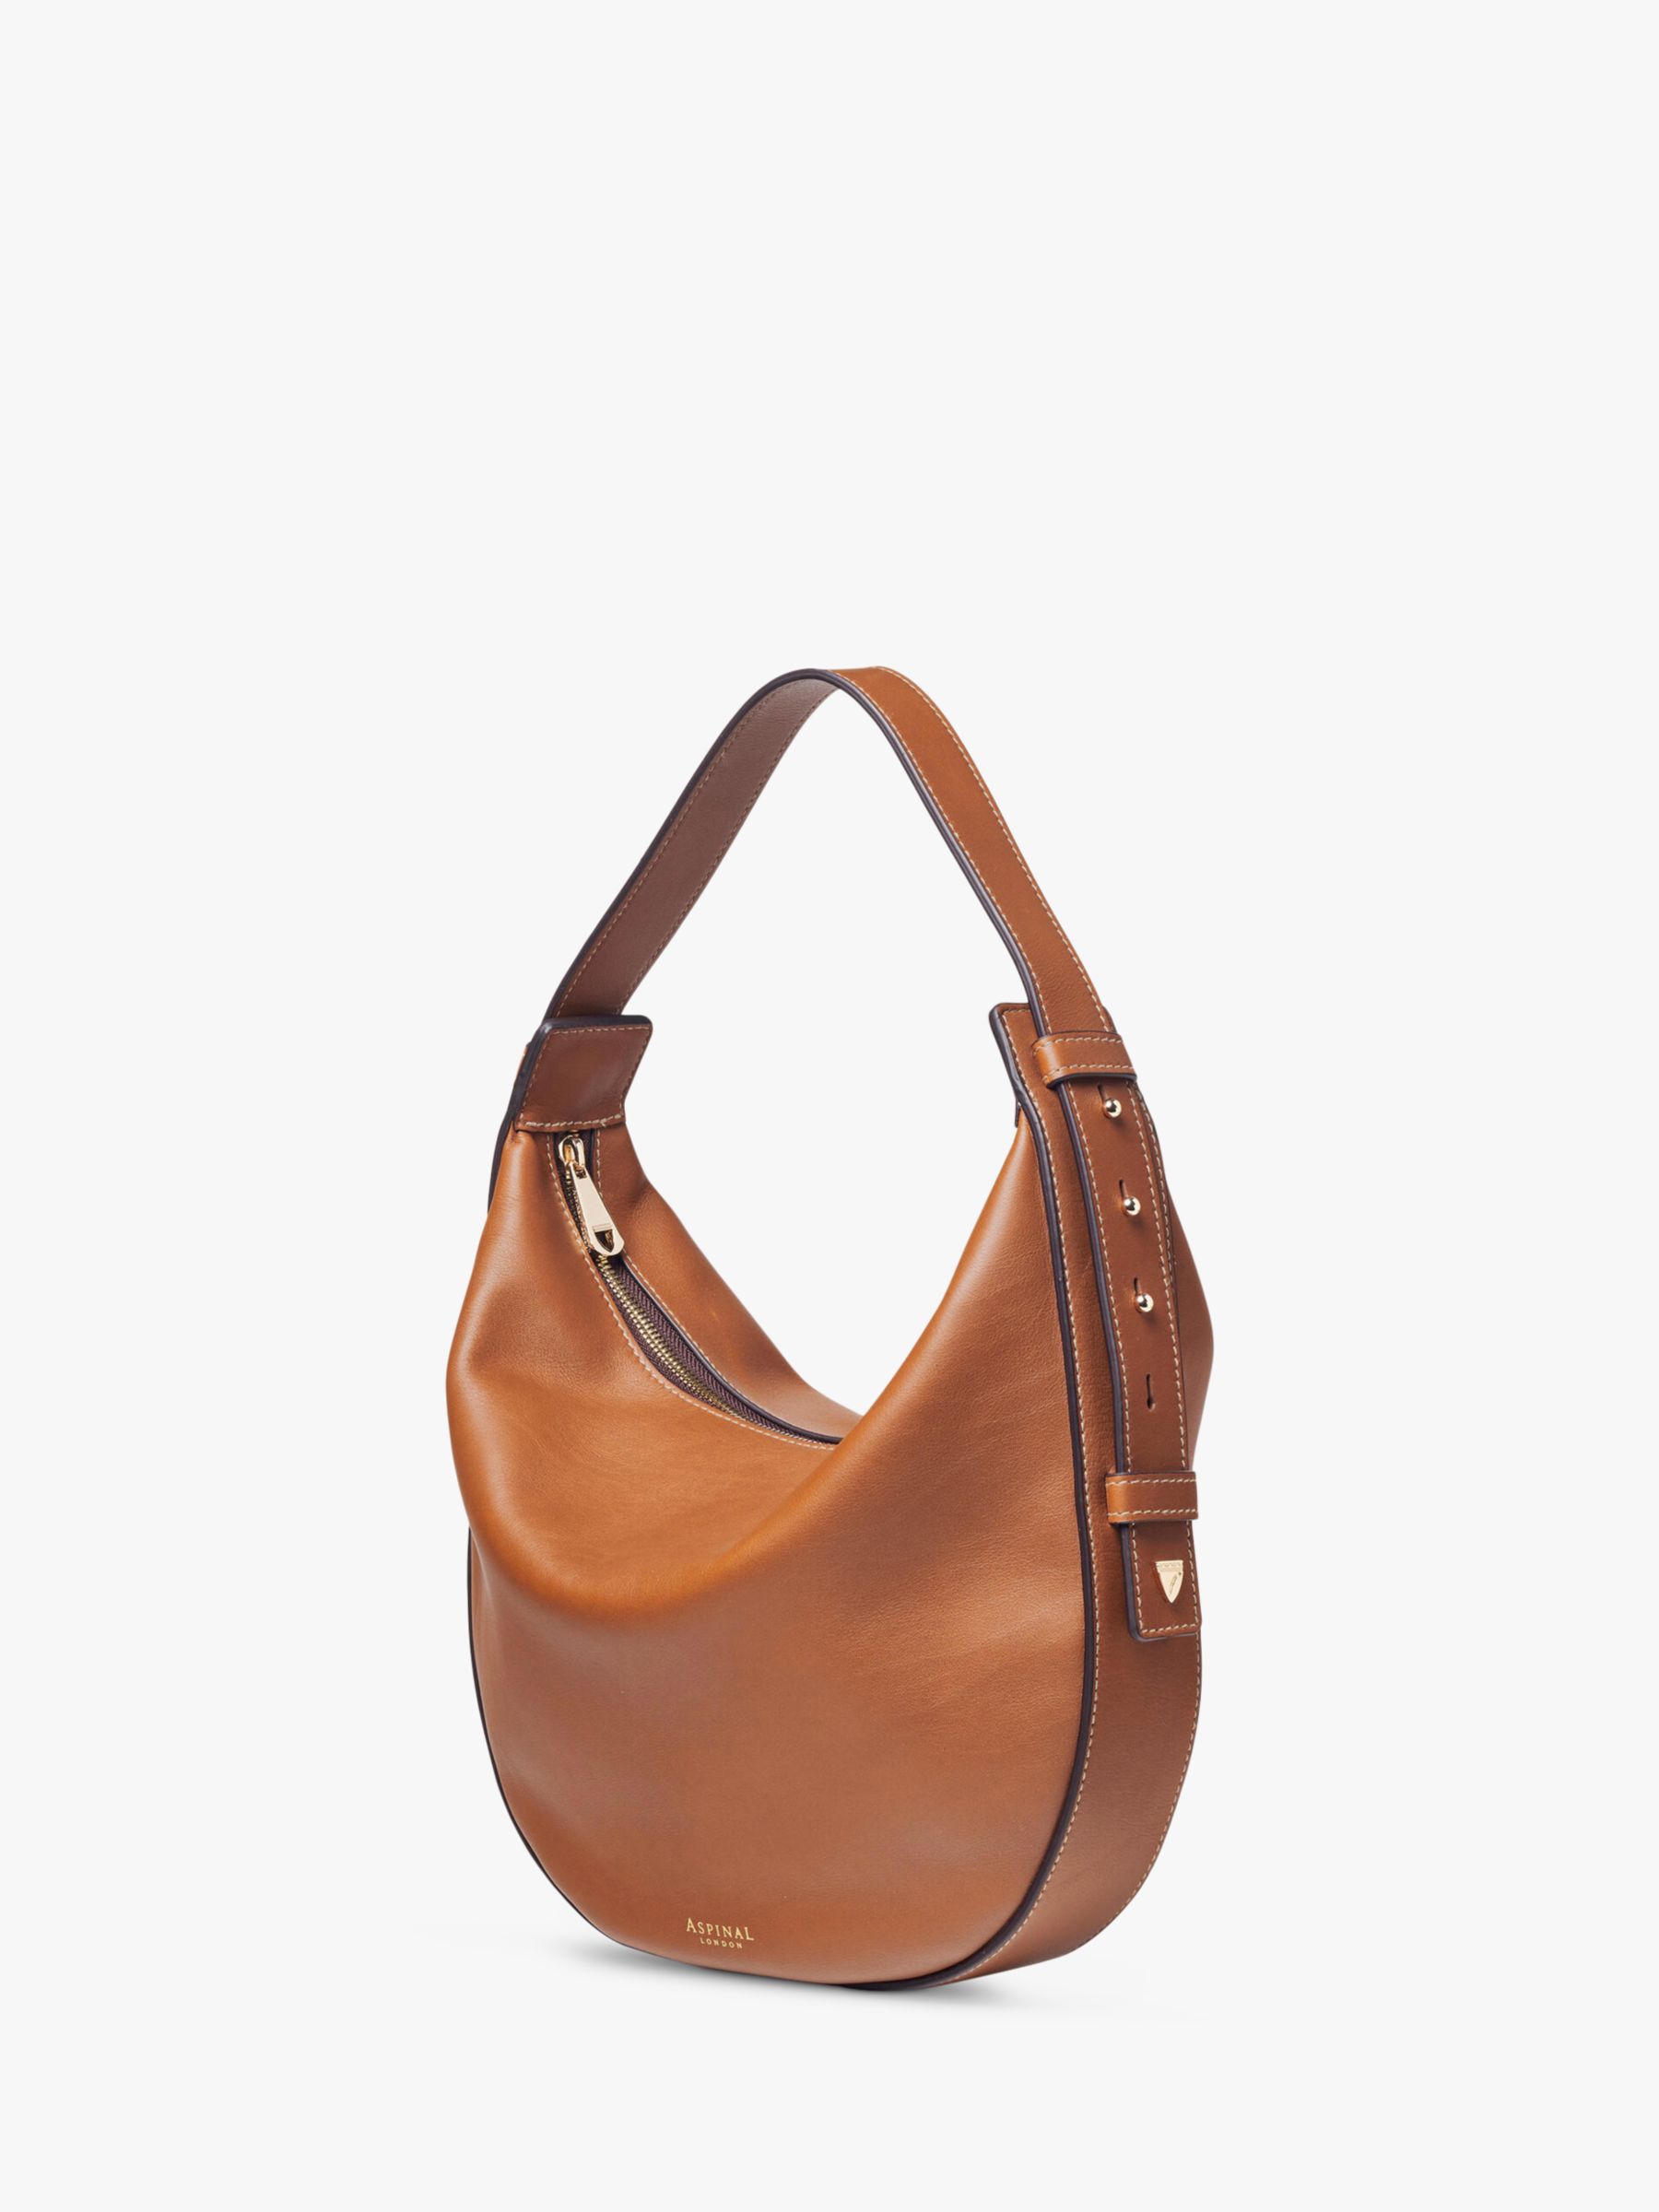 Buy Aspinal of London Crescent Smooth Leather Hobo Bag, Tan Online at johnlewis.com